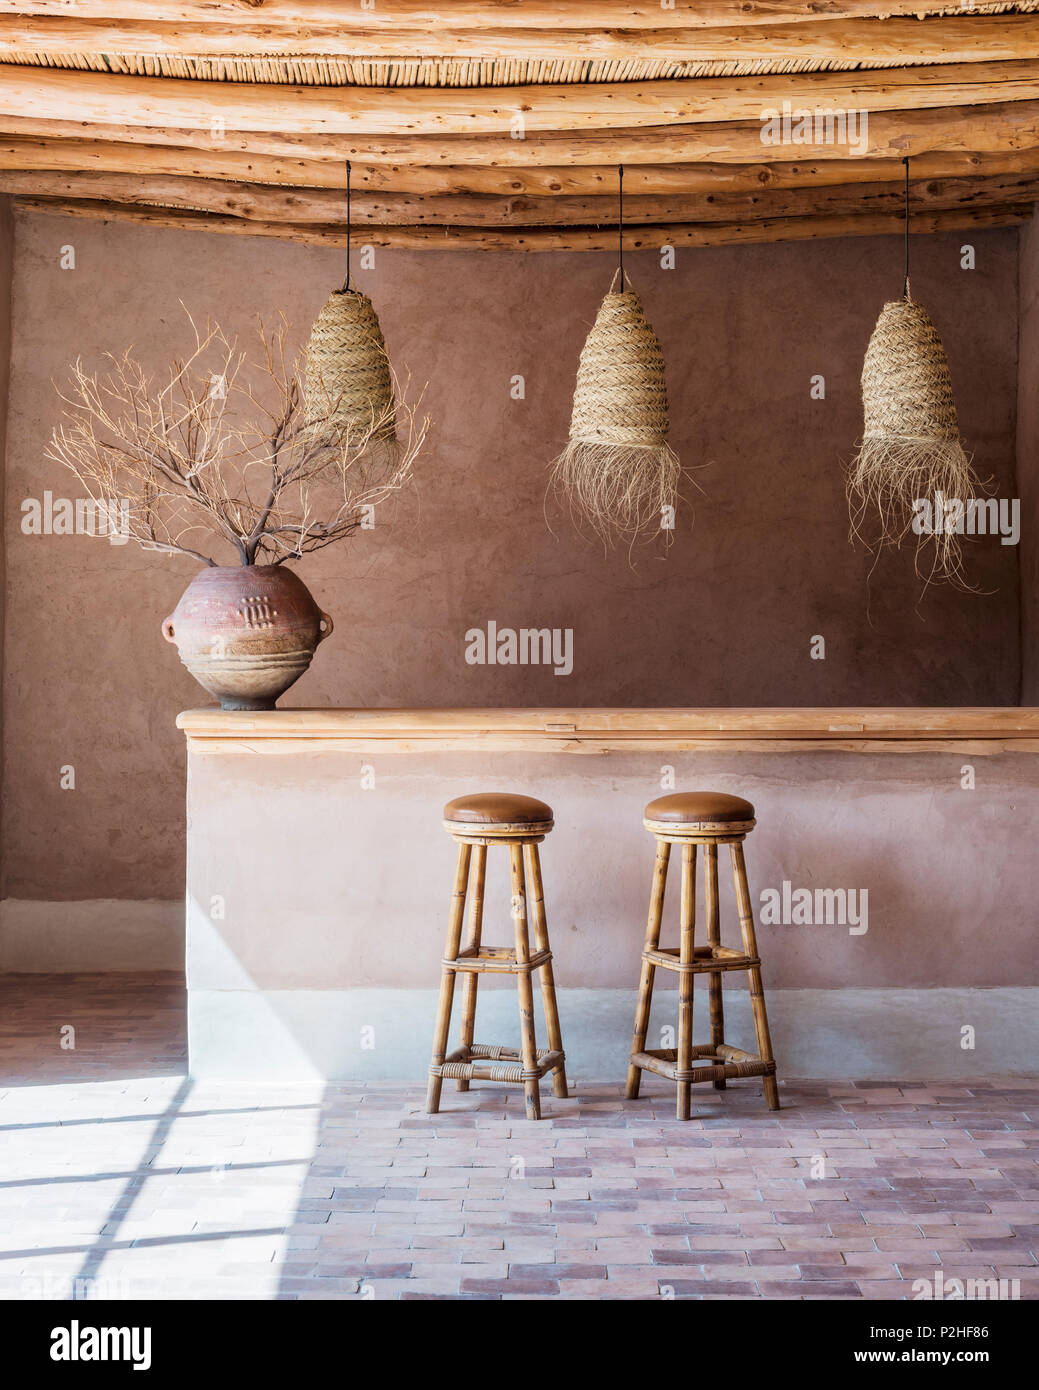 Rattan lanterns hang above counter with bamboo bar stools in bar with wood ceiling and terracotta floor. The antique pot comes from east africa Stock Photo